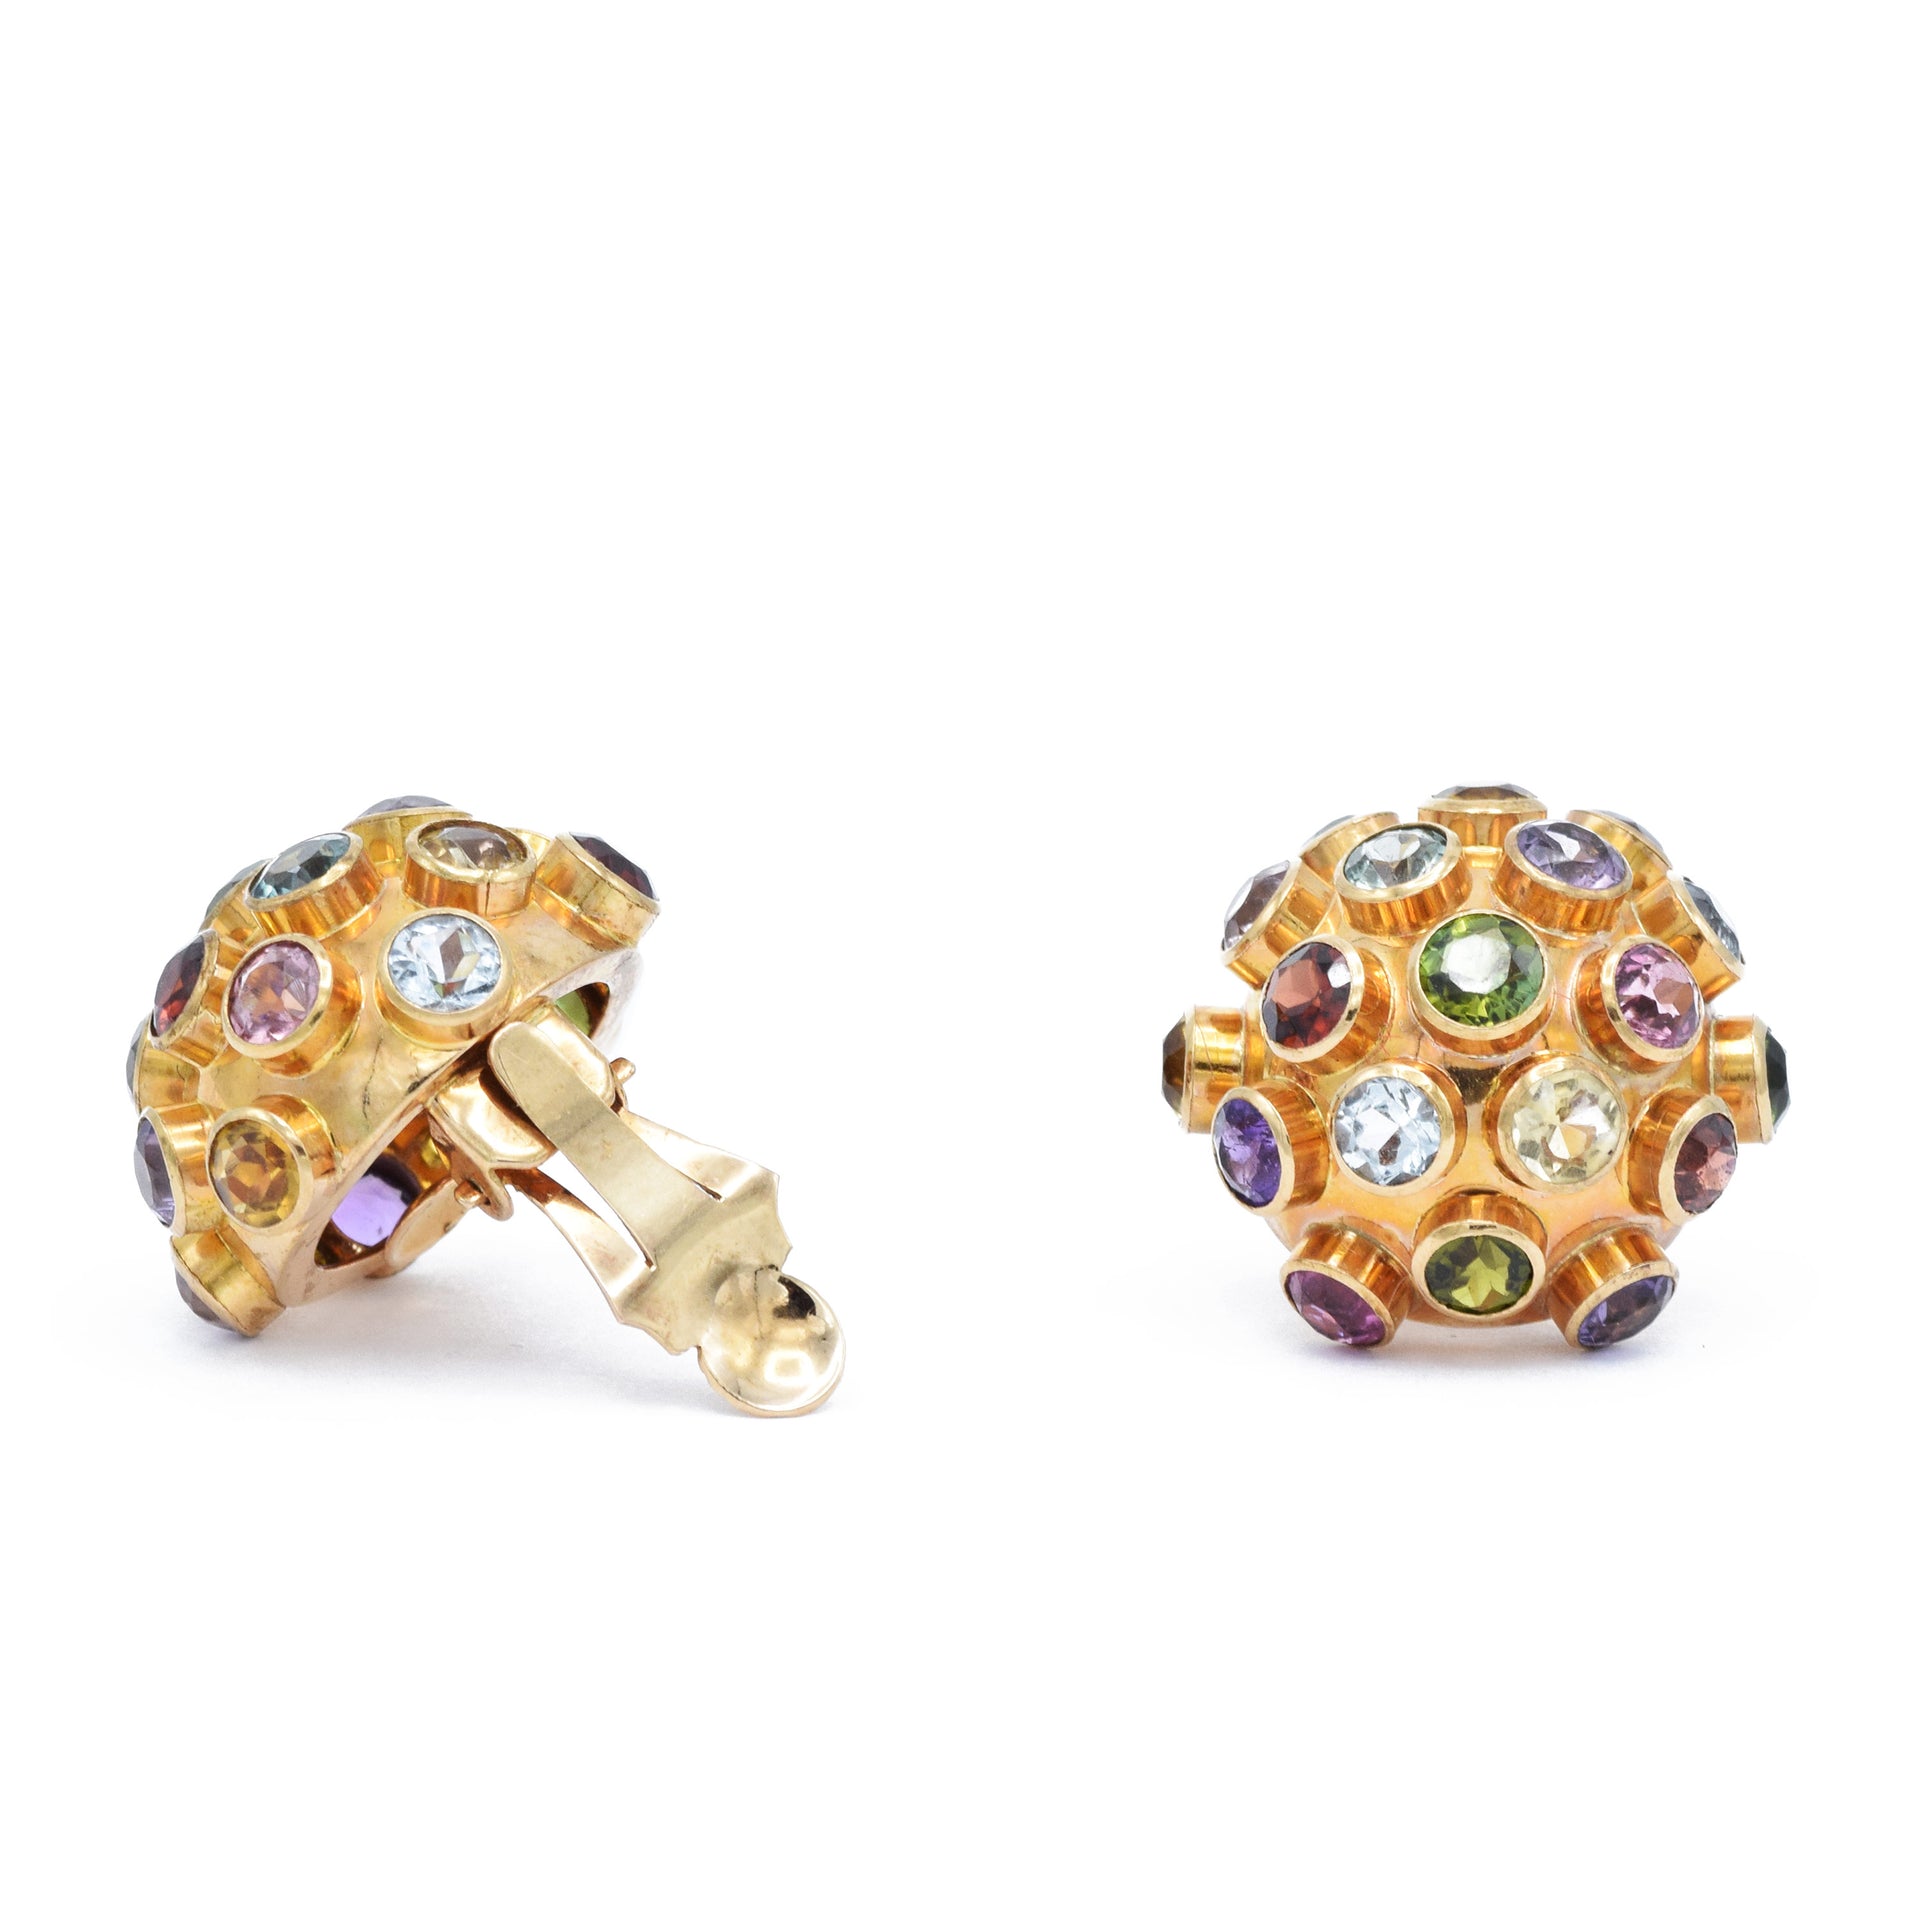 Vintage Multi-Colored Stone Dome Earrings